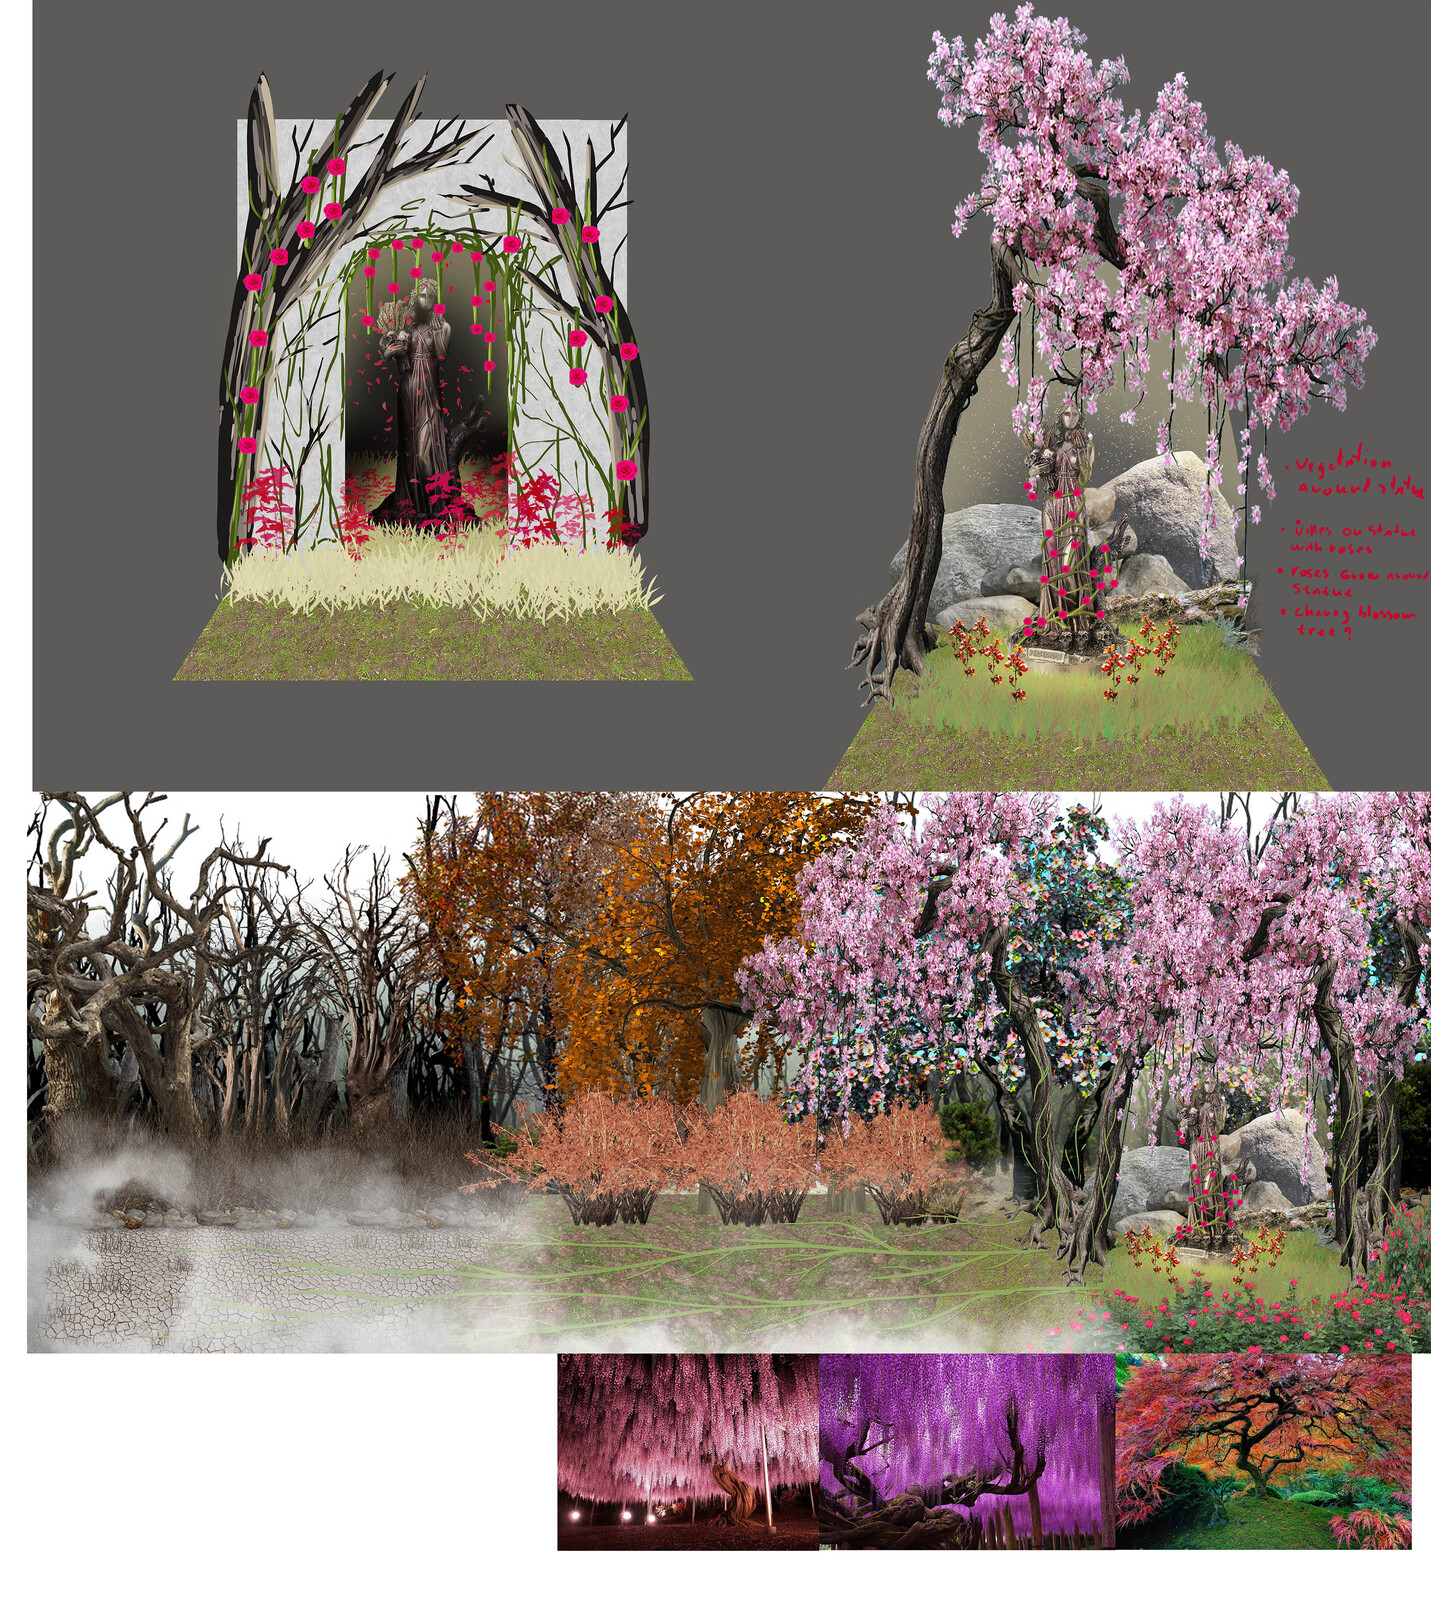 Concept art of the shrine and the transition from concrete
dead vegetation to life like colorful vegetation.